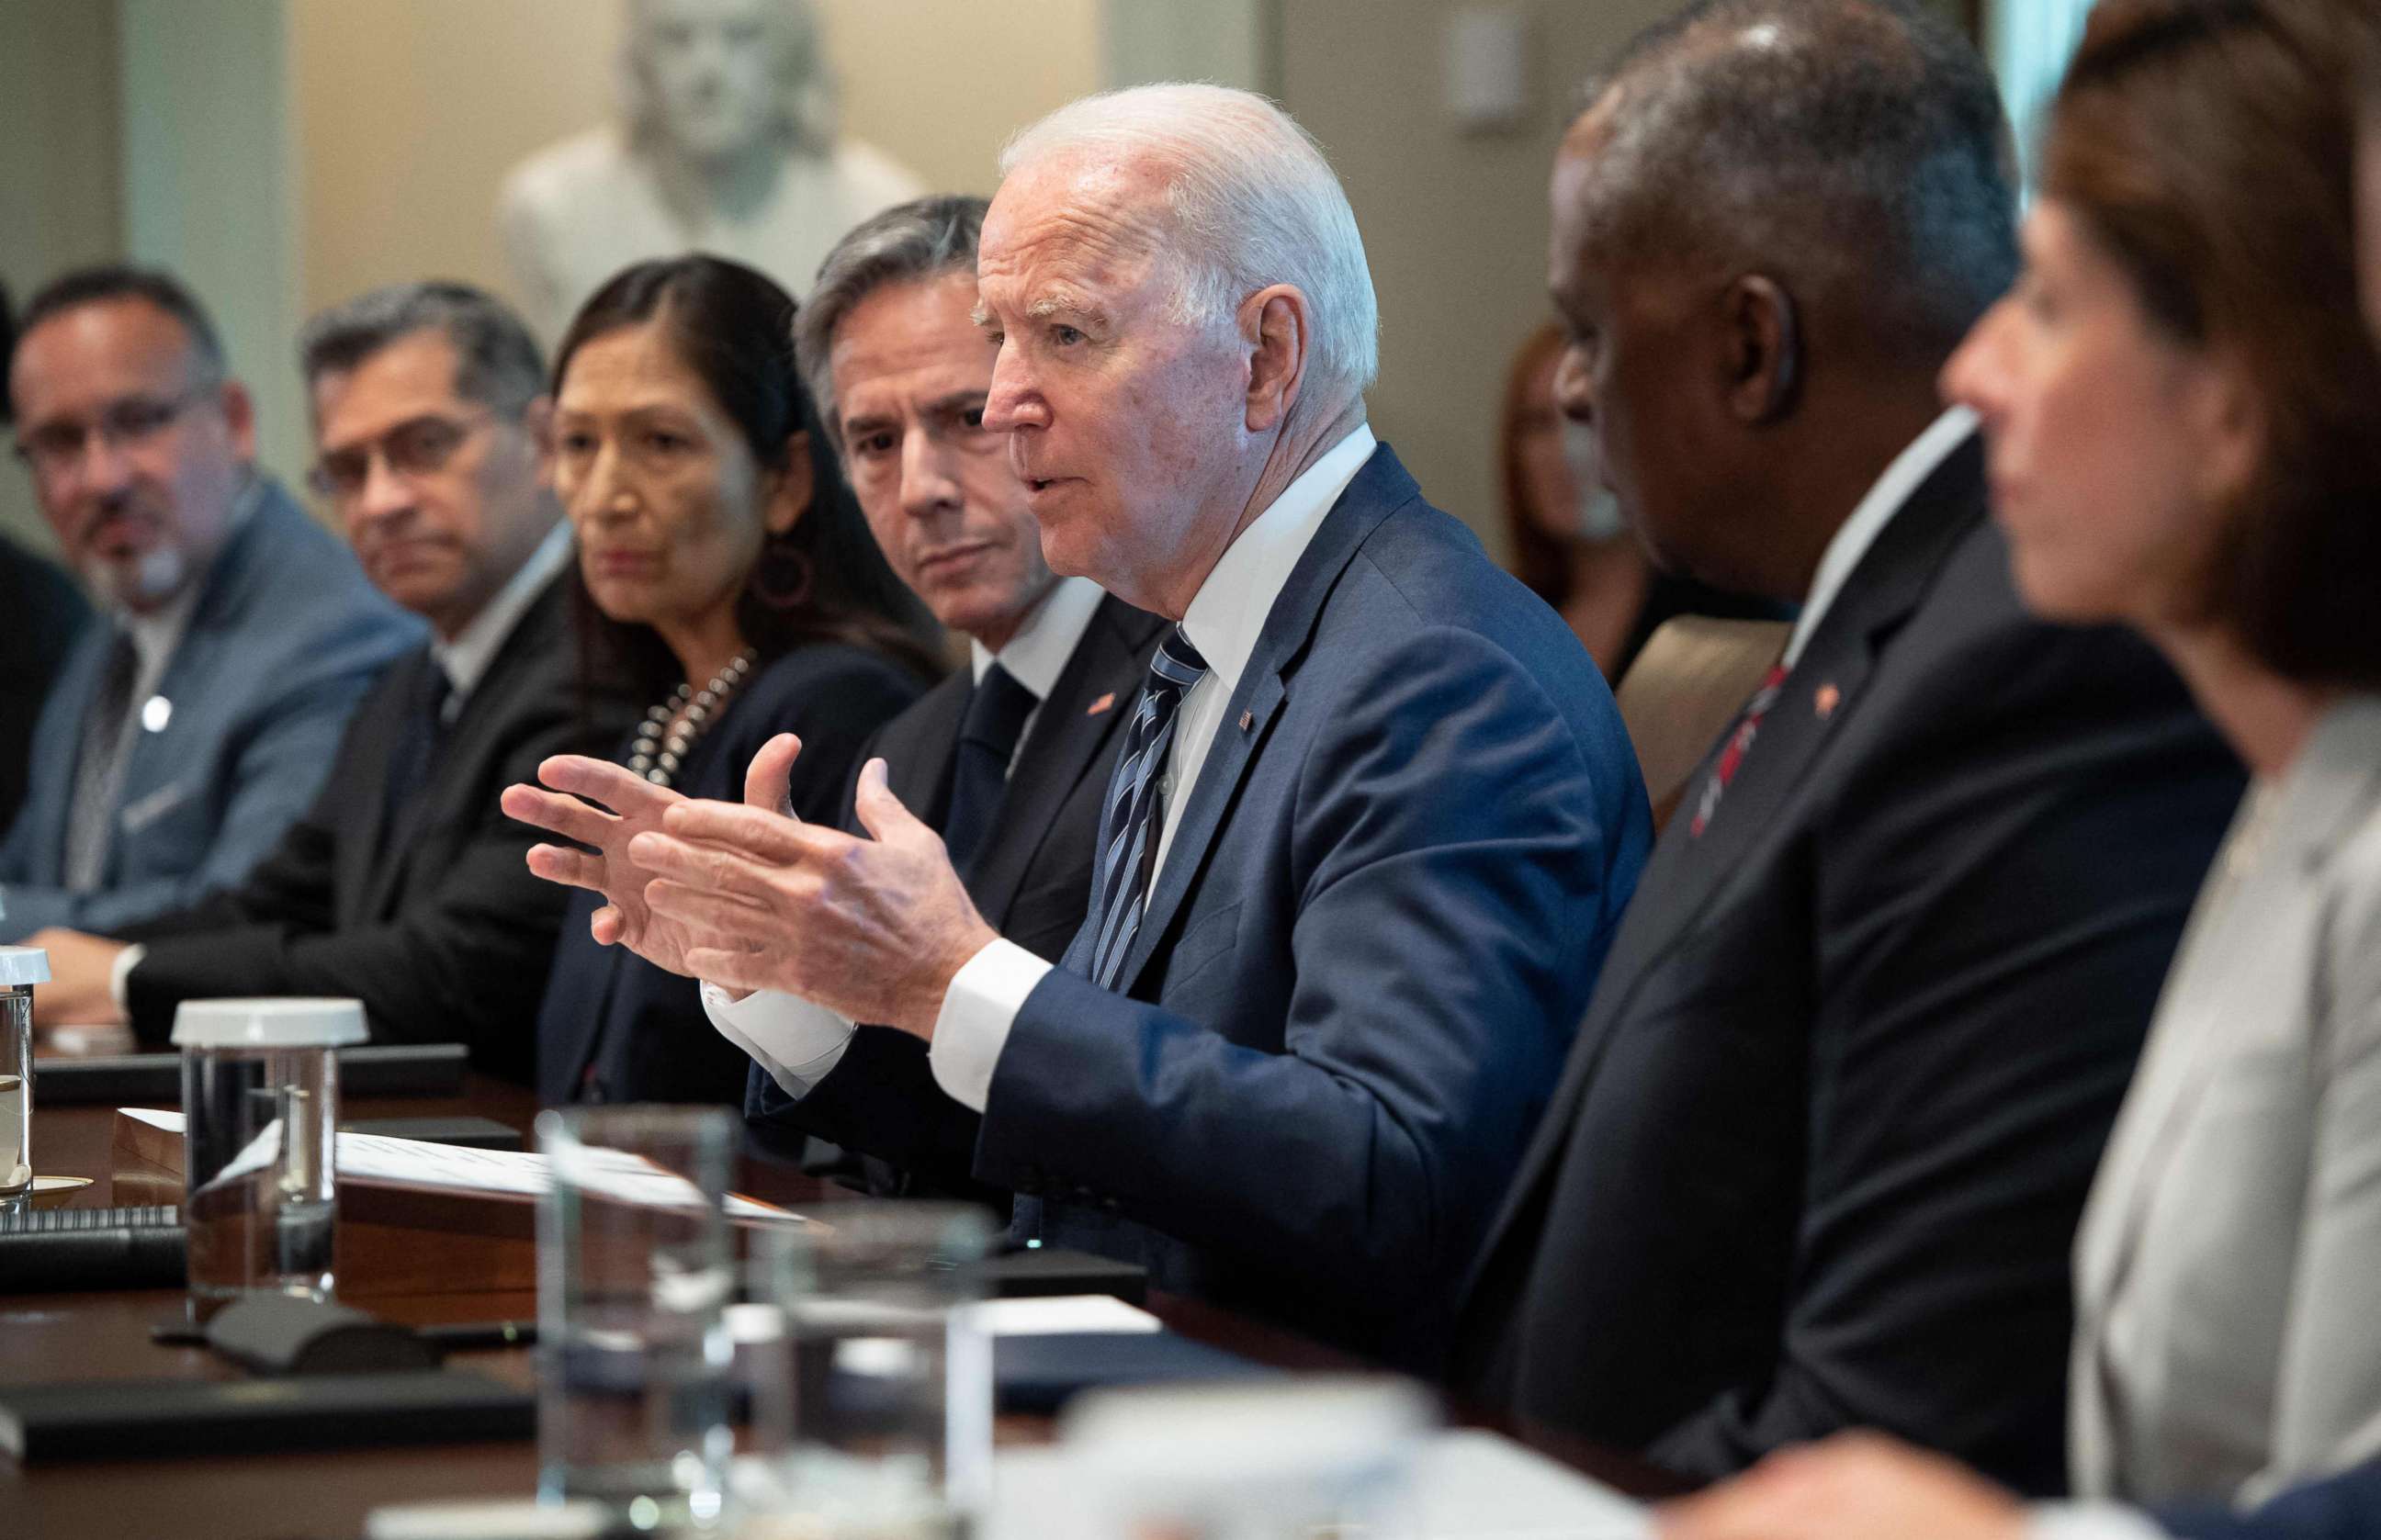 PHOTO: President Joe Biden speaks during a cabinet meeting to mark the 6 month anniversary of his administration in the Cabinet Room of the White House in Washington, DC, July 20, 2021.